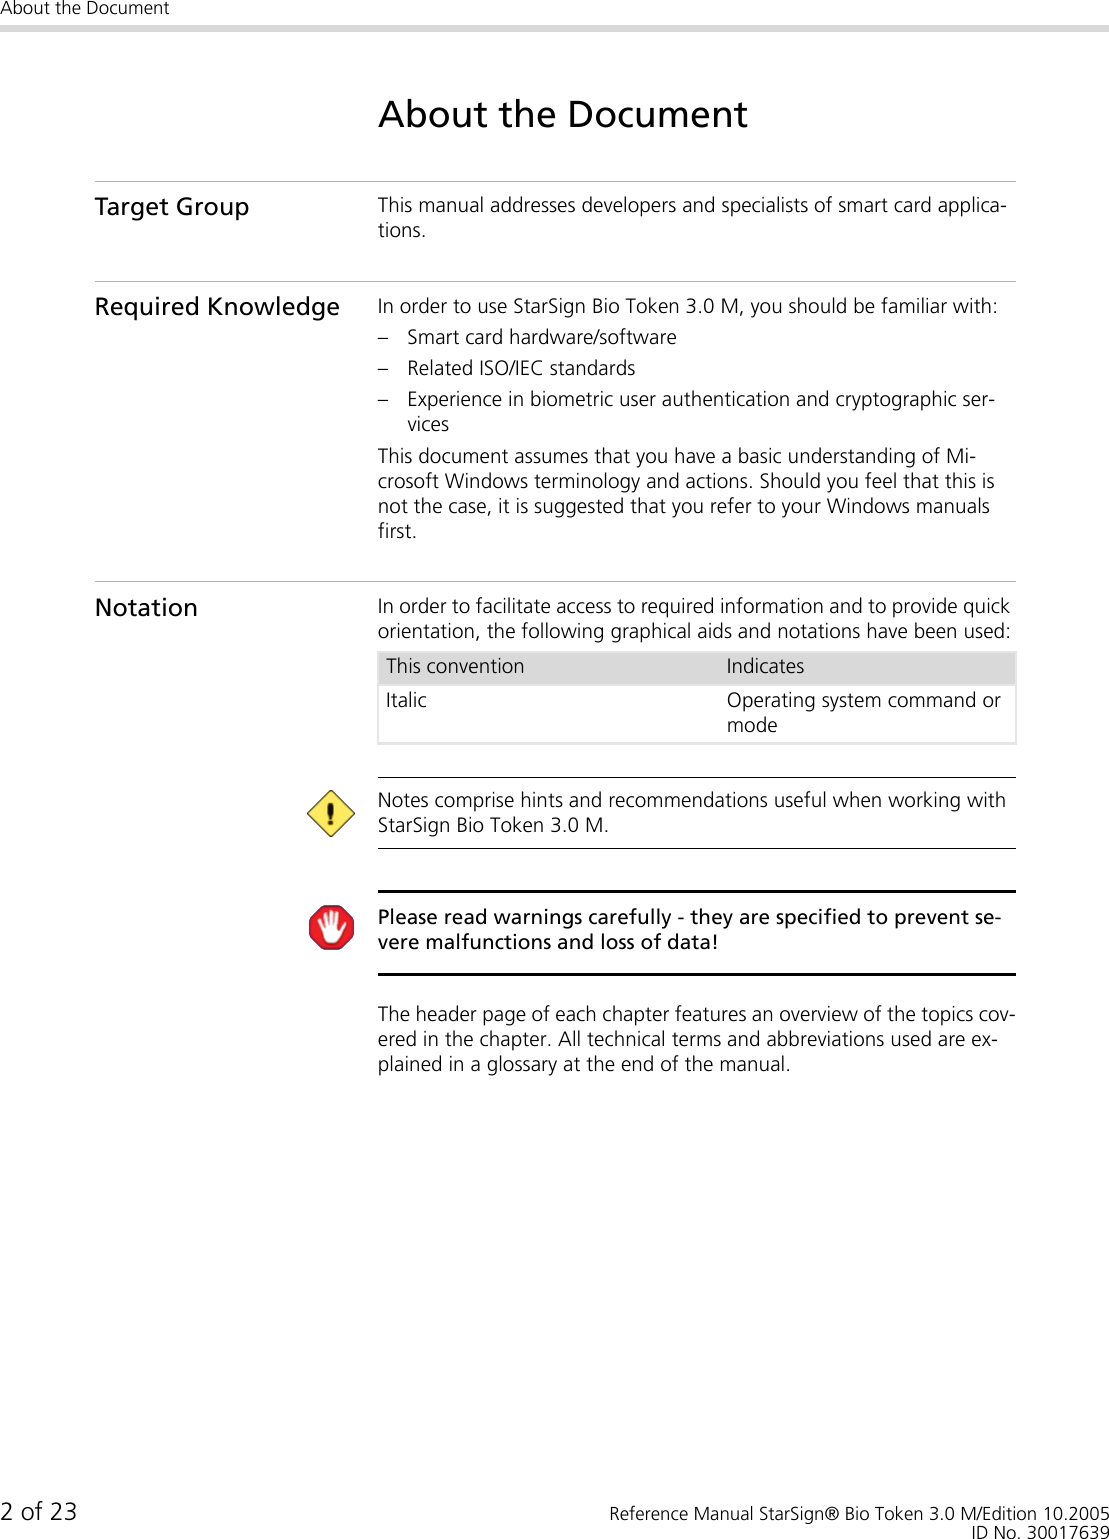 About the Document2 of 23 Reference Manual StarSign® Bio Token 3.0 M/Edition 10.2005ID No. 30017639About the DocumentTarget Group This manual addresses developers and specialists of smart card applica-tions.Required Knowledge In order to use StarSign Bio Token 3.0 M, you should be familiar with:– Smart card hardware/software– Related ISO/IEC standards– Experience in biometric user authentication and cryptographic ser-vicesThis document assumes that you have a basic understanding of Mi-crosoft Windows terminology and actions. Should you feel that this is not the case, it is suggested that you refer to your Windows manuals first.Notation In order to facilitate access to required information and to provide quick orientation, the following graphical aids and notations have been used: Notes comprise hints and recommendations useful when working with StarSign Bio Token 3.0 M. Please read warnings carefully - they are specified to prevent se-vere malfunctions and loss of data!The header page of each chapter features an overview of the topics cov-ered in the chapter. All technical terms and abbreviations used are ex-plained in a glossary at the end of the manual.This convention IndicatesItalic Operating system command or mode